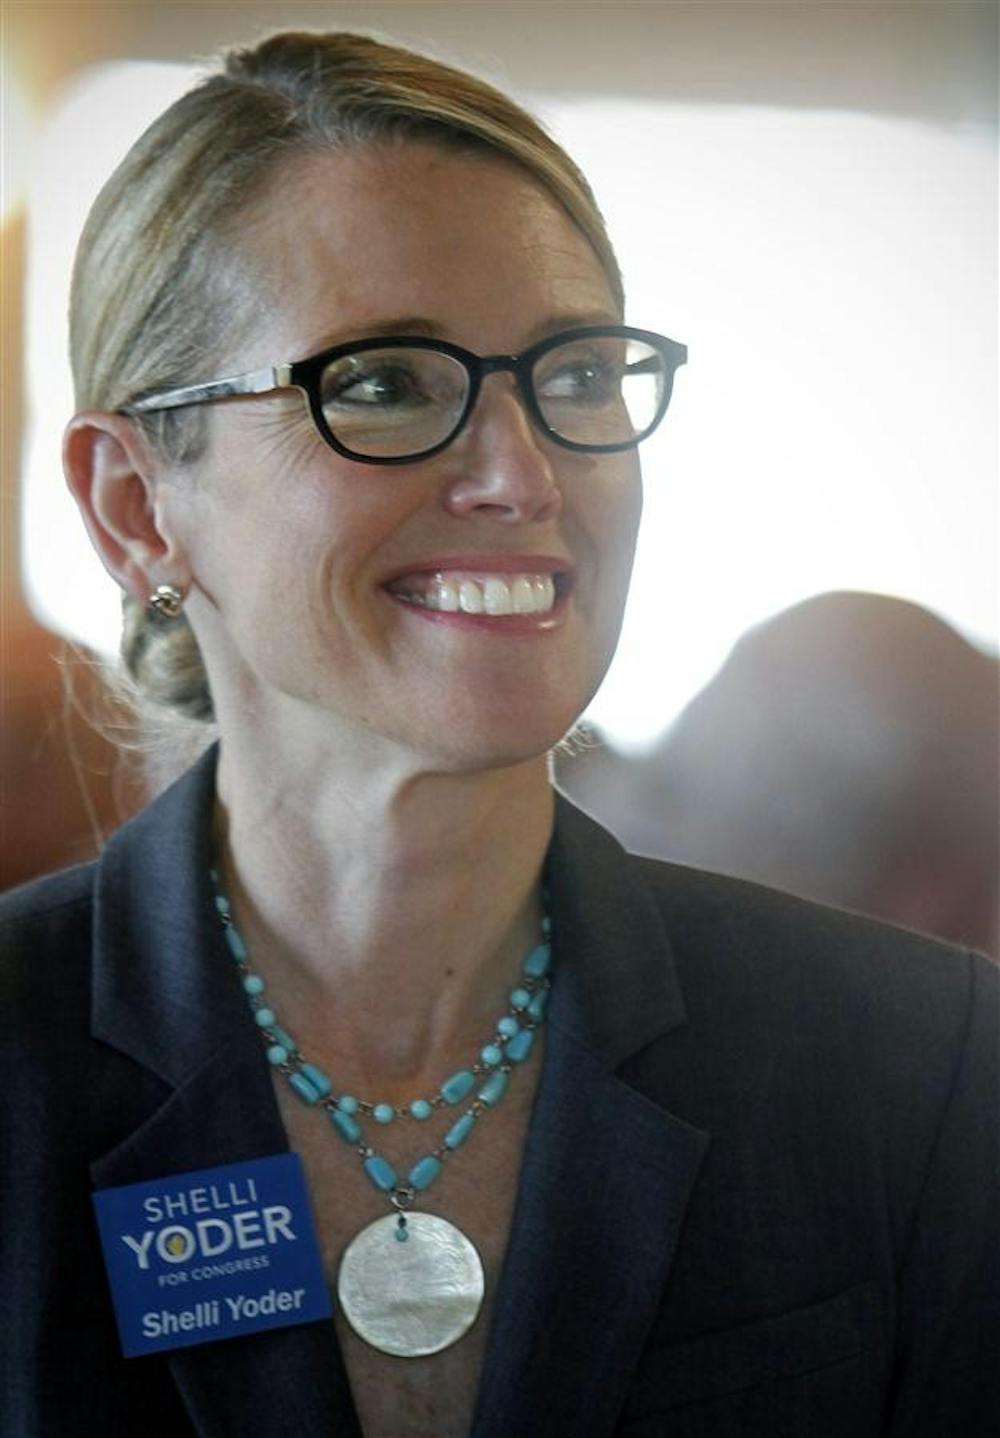 Shelli Yoder listens to an opening speech by Margaret McGovern, the former mayor of Greenwood, during a Johnson County Democrats dinner on Thursday at the Valle Vista Golf Club in Greenwood.